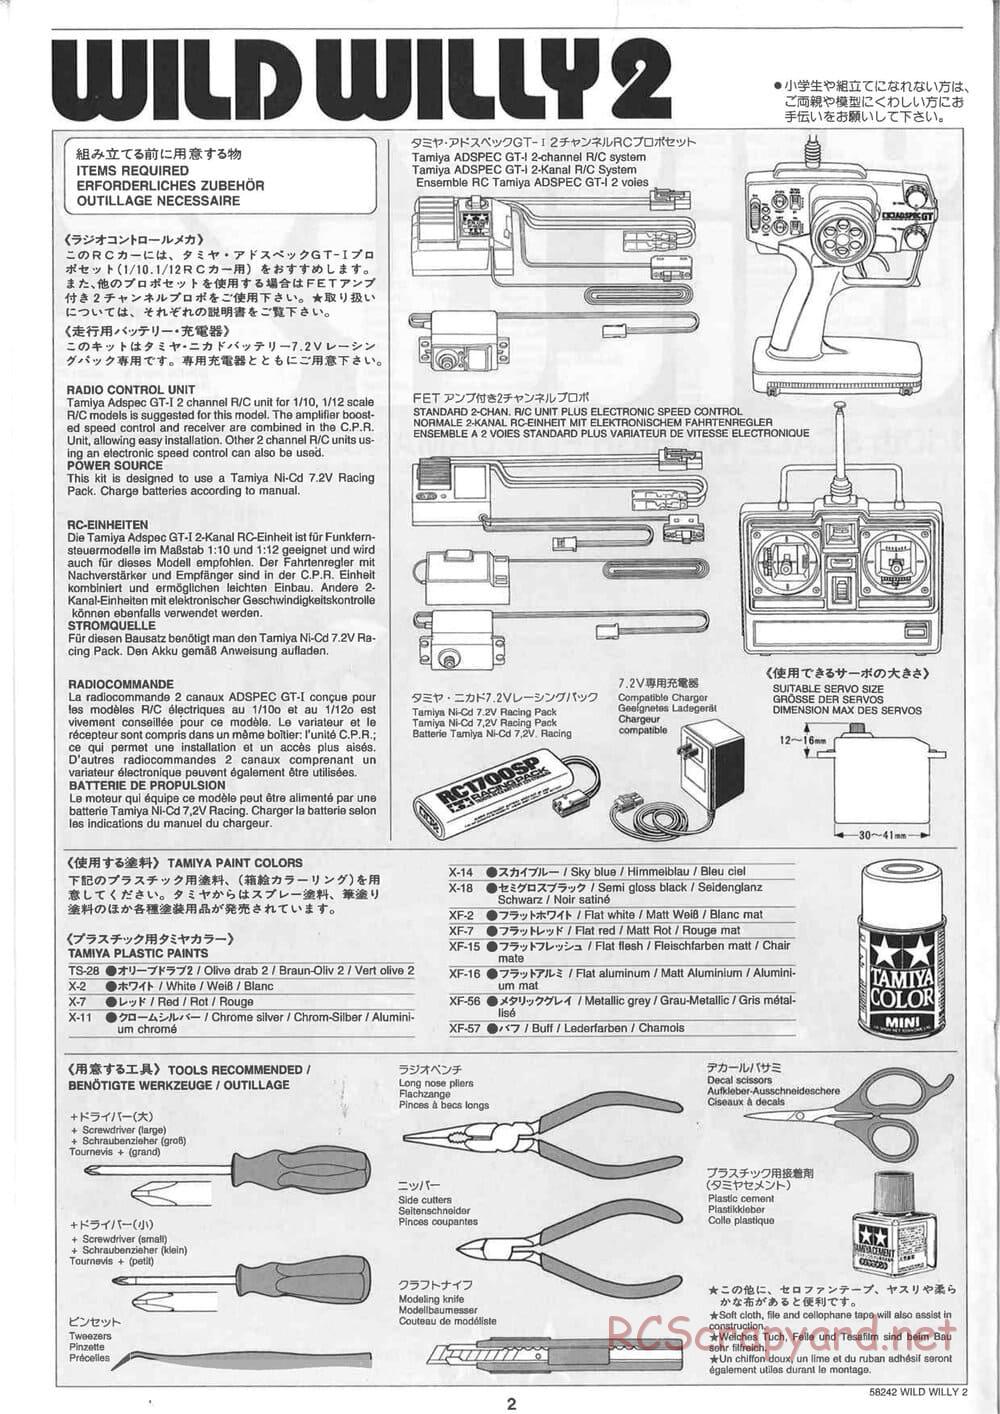 Tamiya - Wild Willy 2 - WR-02 Chassis - Manual - Page 2